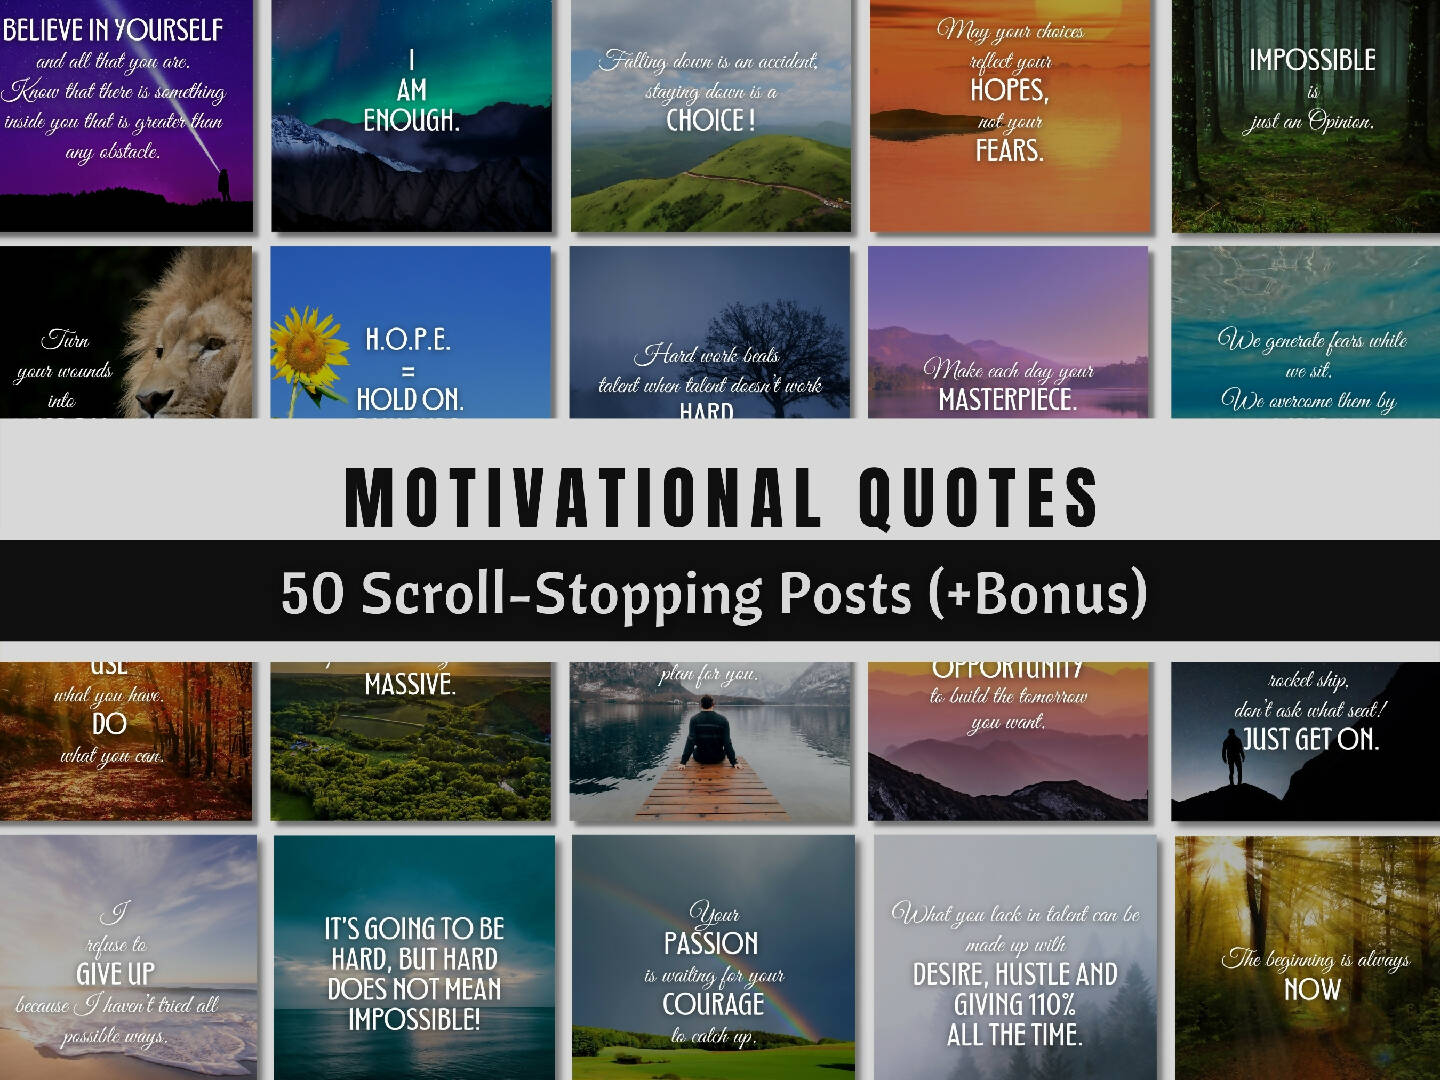 50 Motivational Quote Templates for Instagram | inspirational quotes social media | motivational quotes instagram | editable quote canva